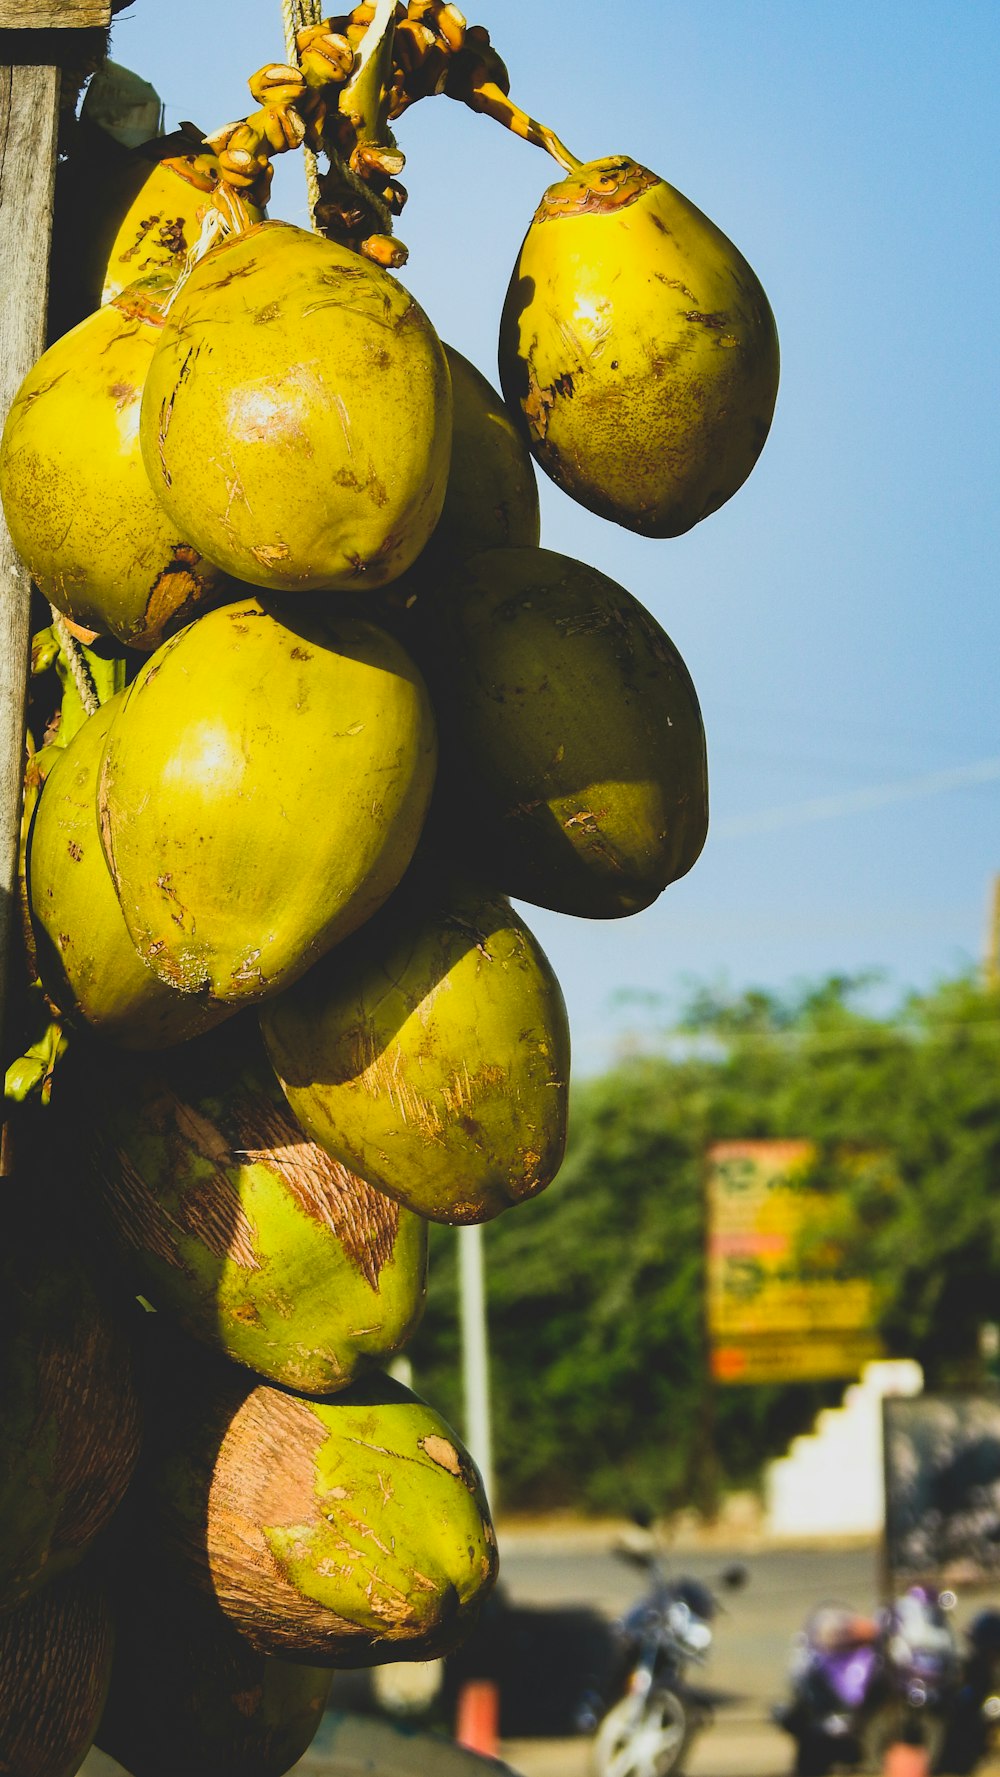 yellow and green fruit during daytime